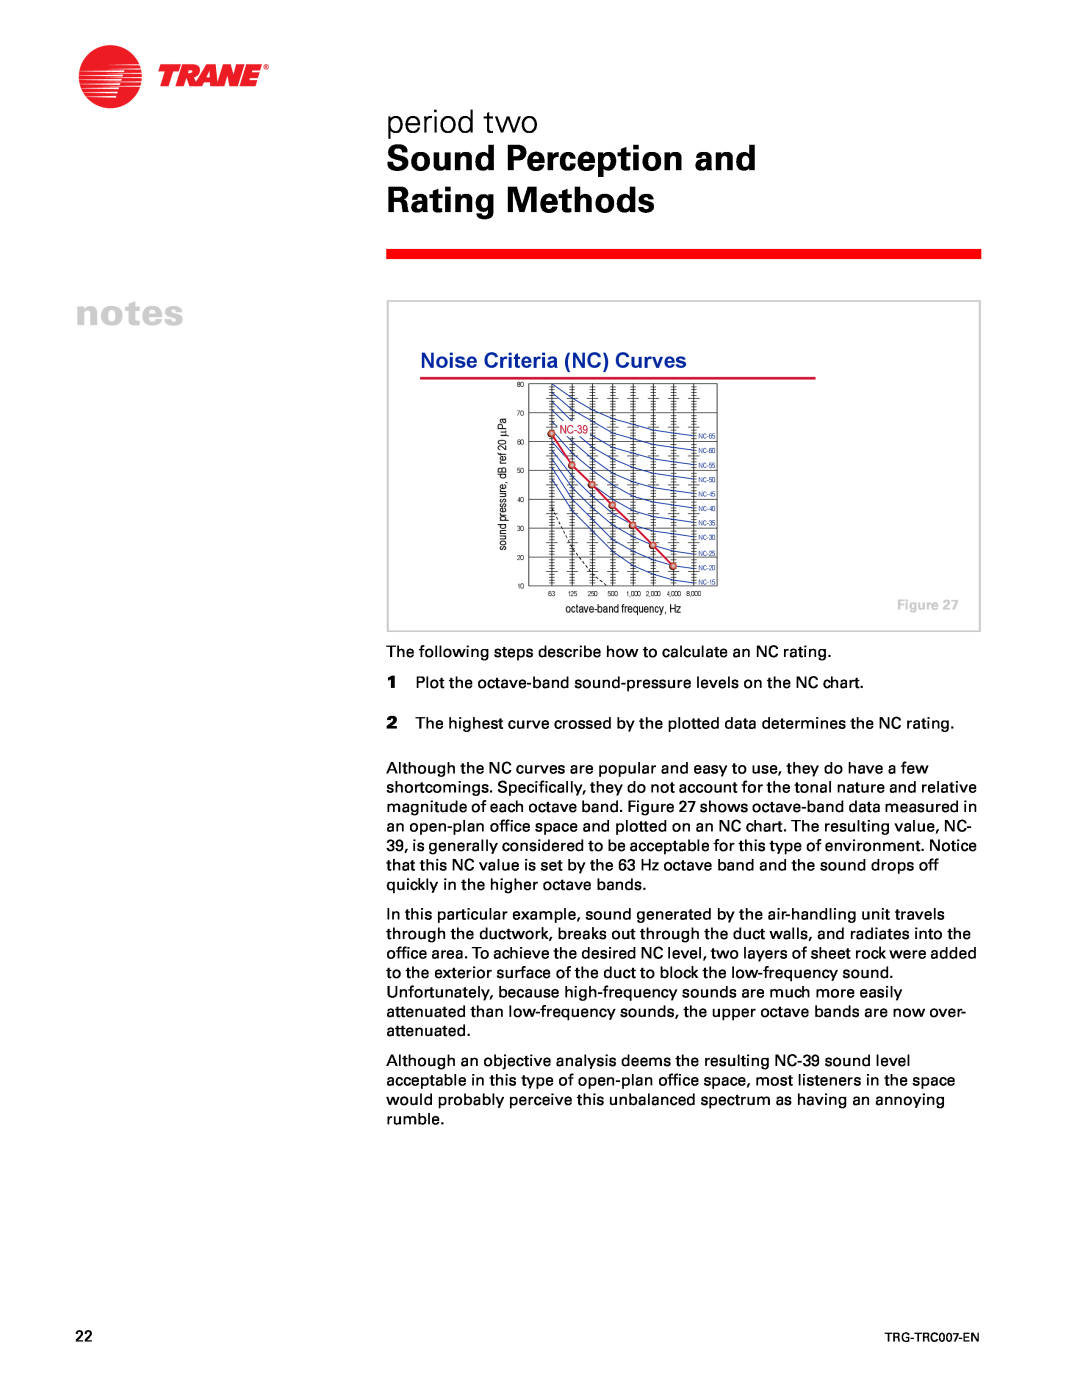 Trane TRG-TRC007-EN manual Sound Perception and Rating Methods, period two, Noise Criteria NC Curves, NC-39 